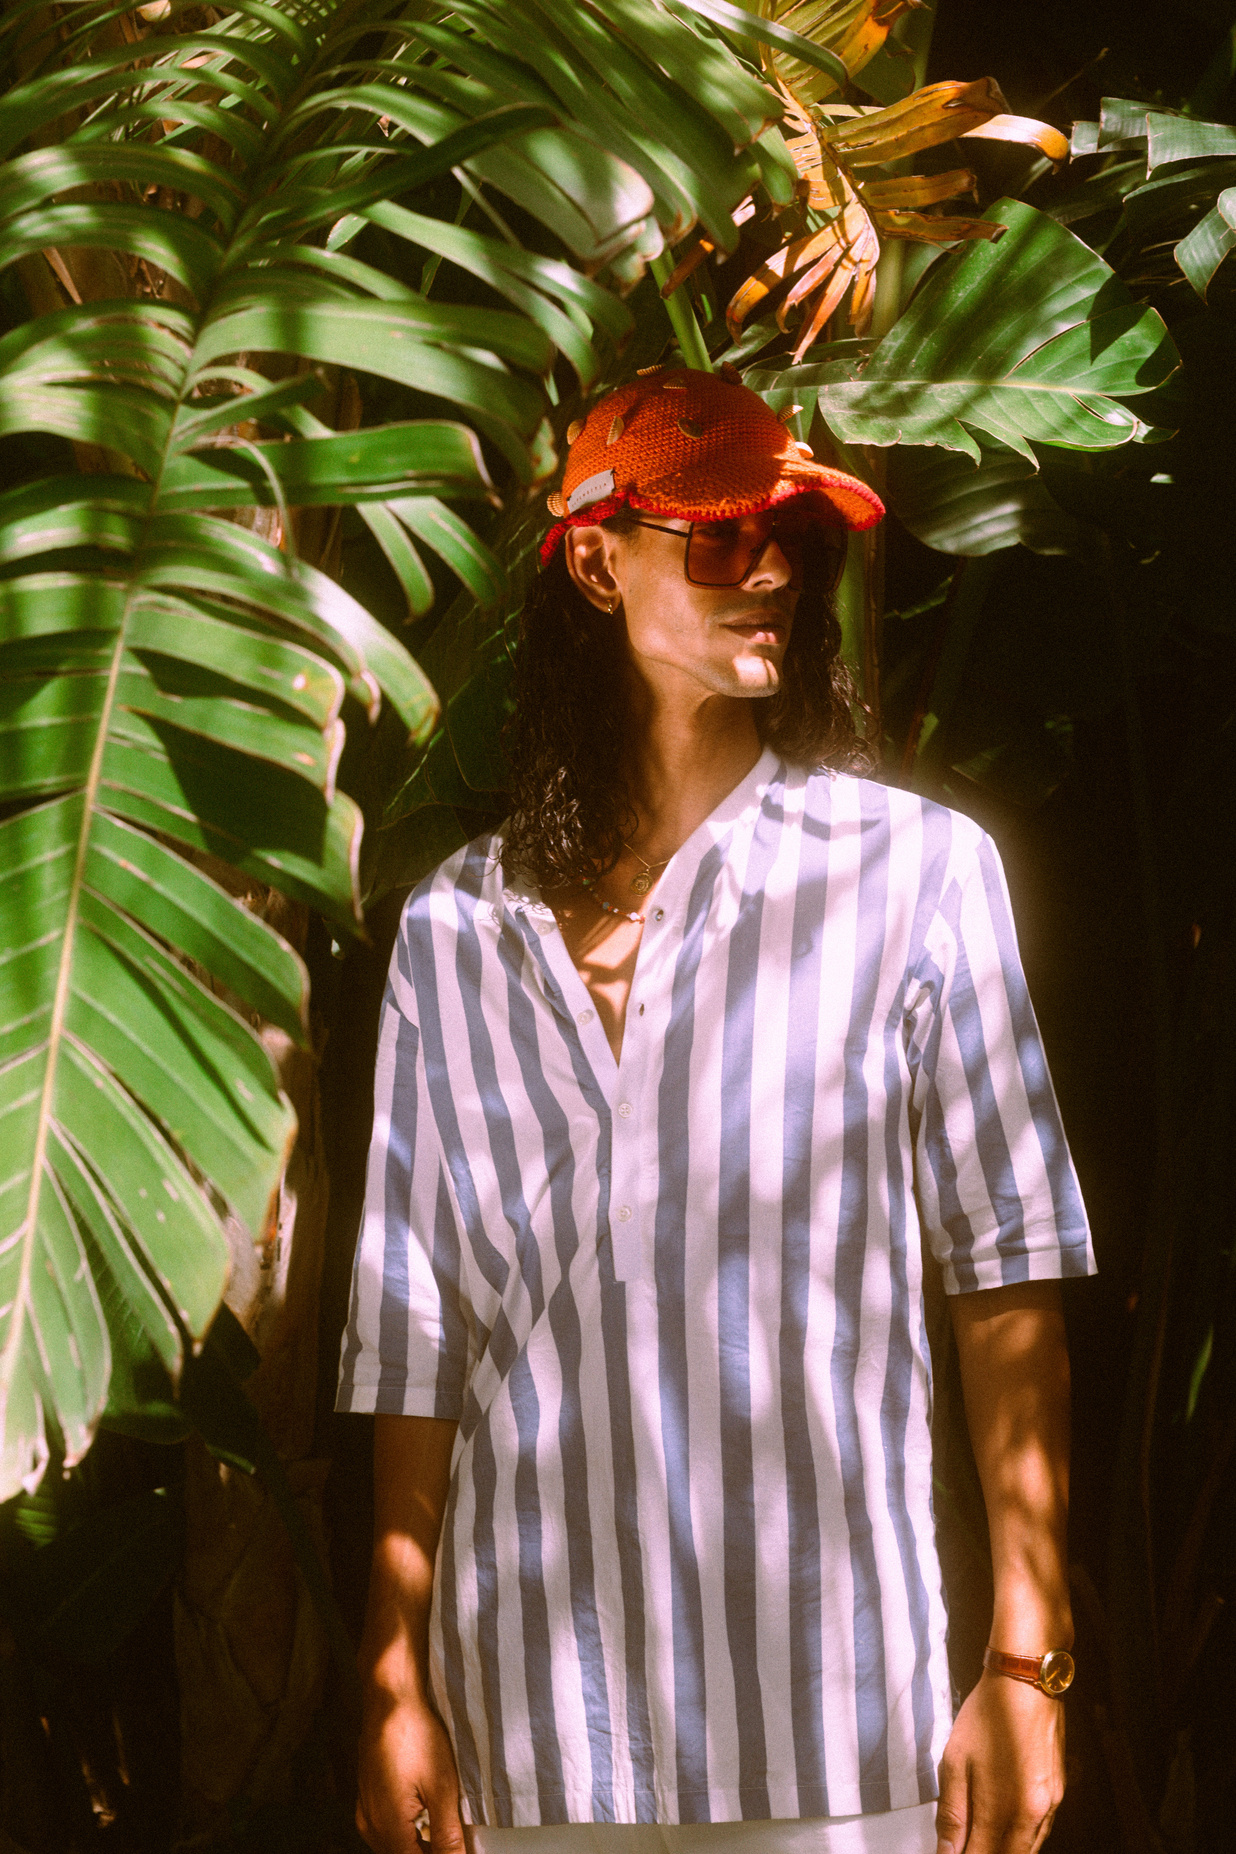 a person in a striped shirt and red hat standing in front of some plants